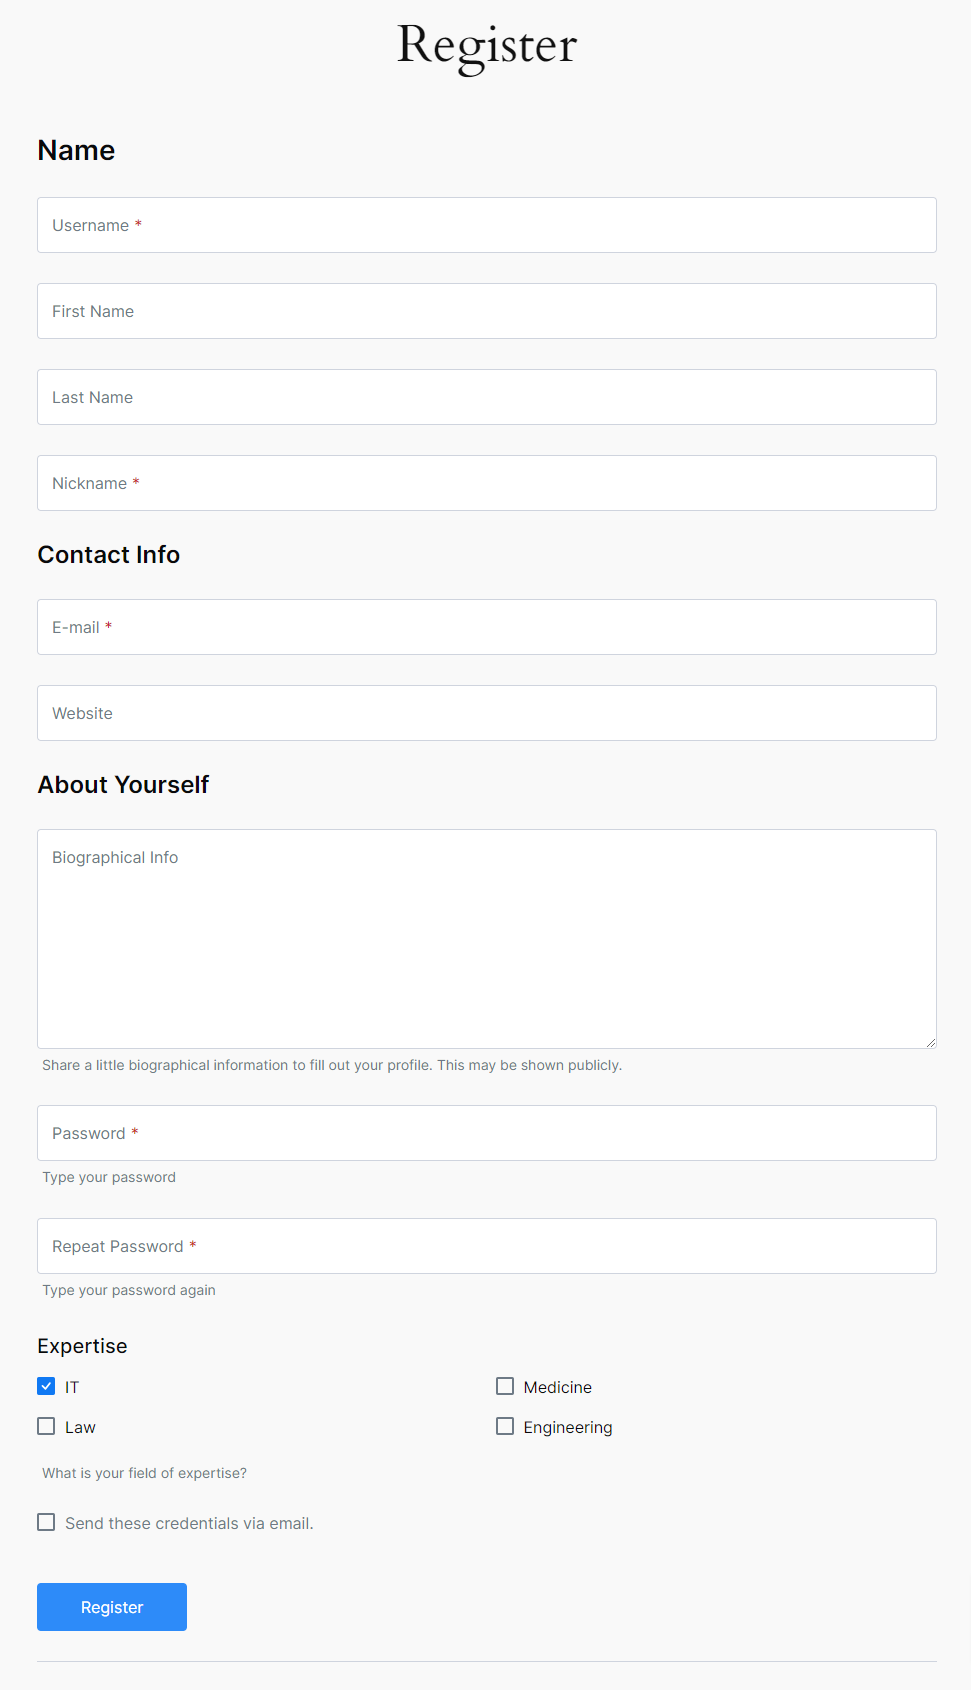 Profile Builder - Checkbox Field Front-End